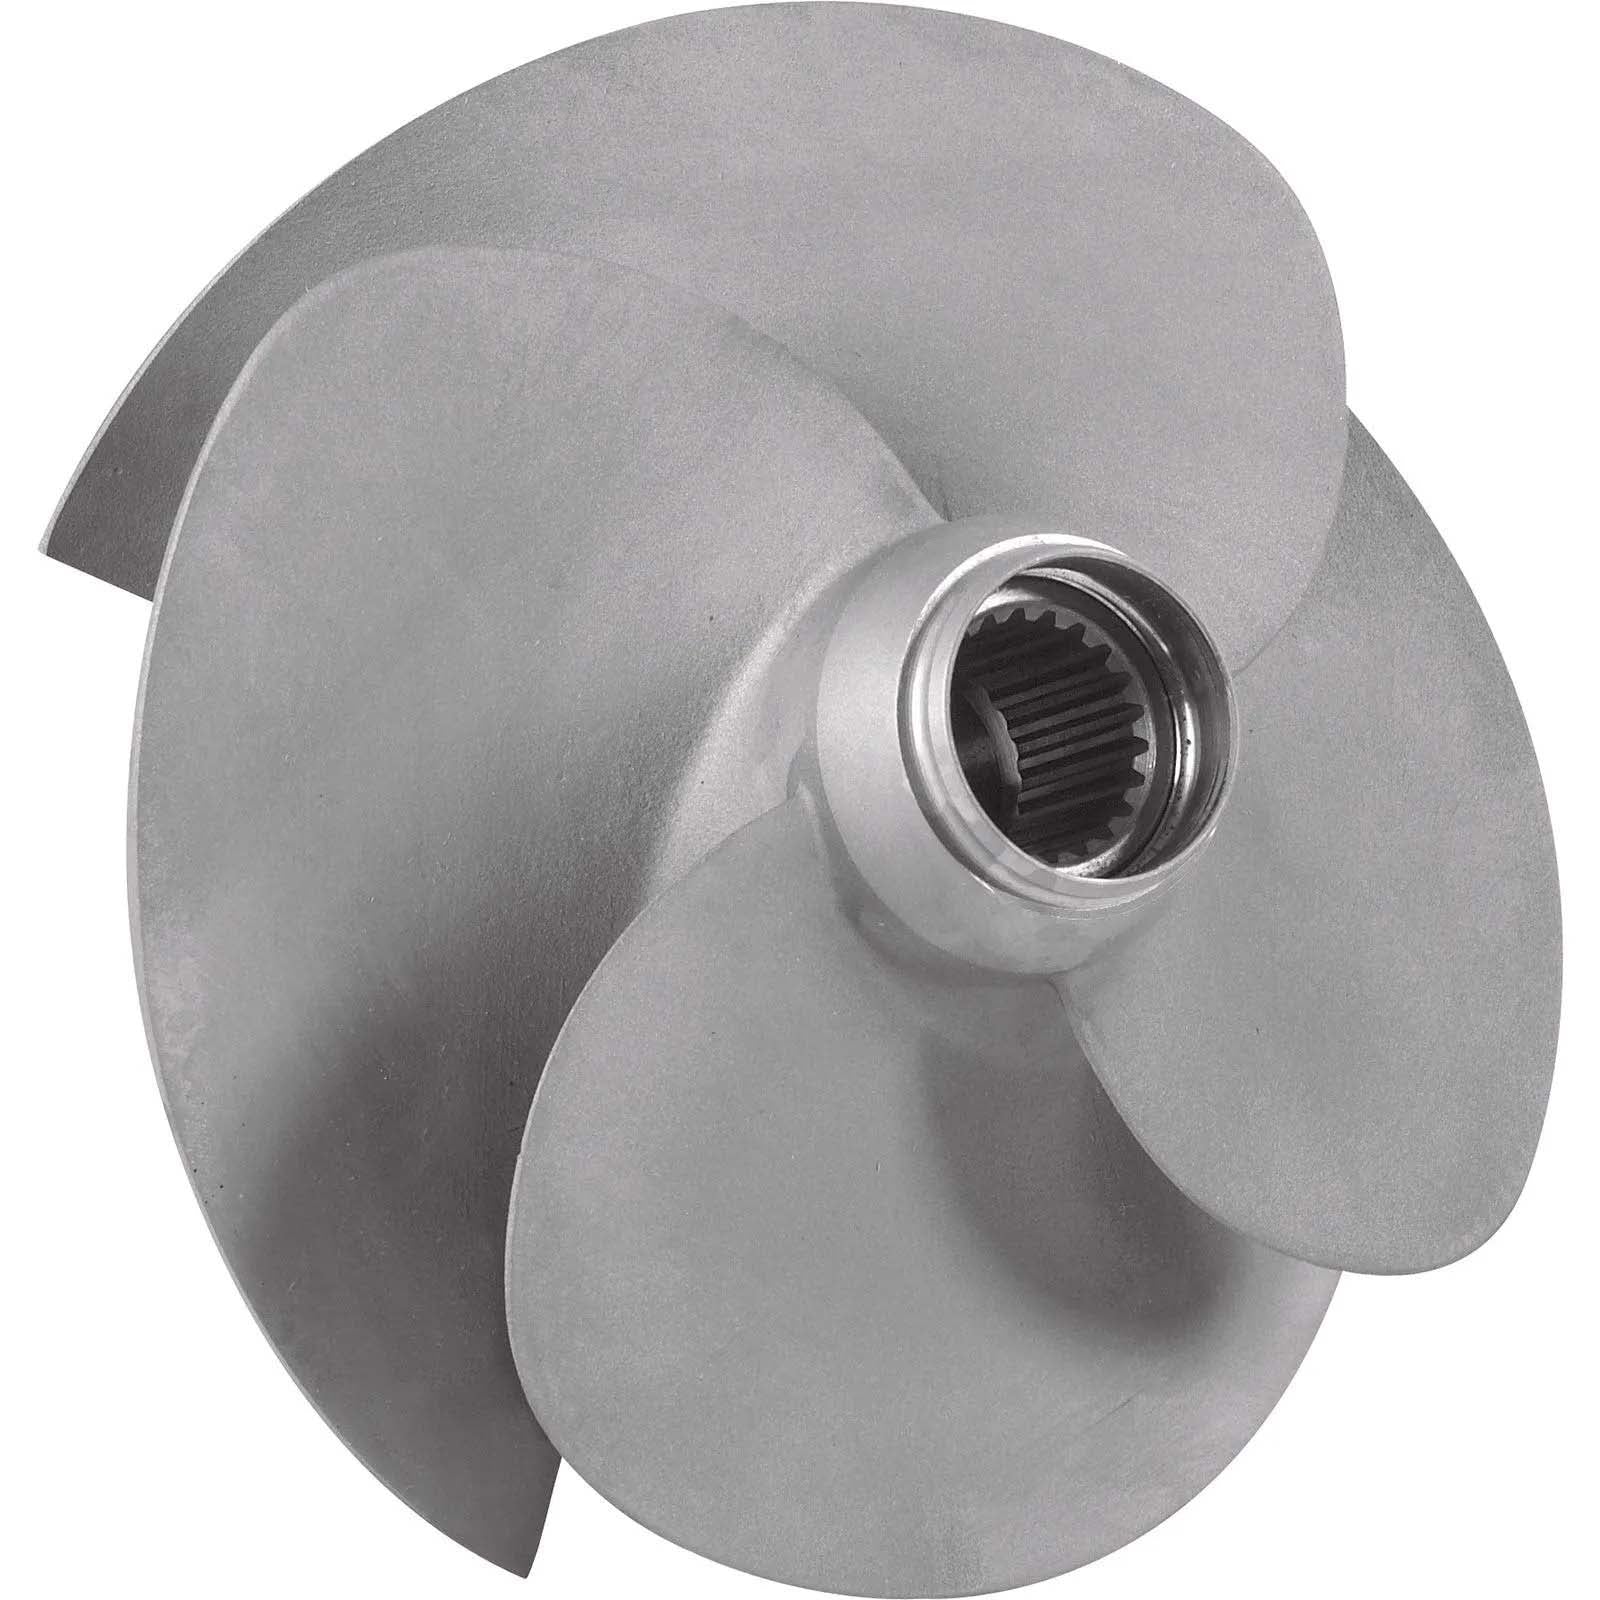 Sea-Doo  RXP-X (2021), RXT-X (2018 and up) impeller 267001050